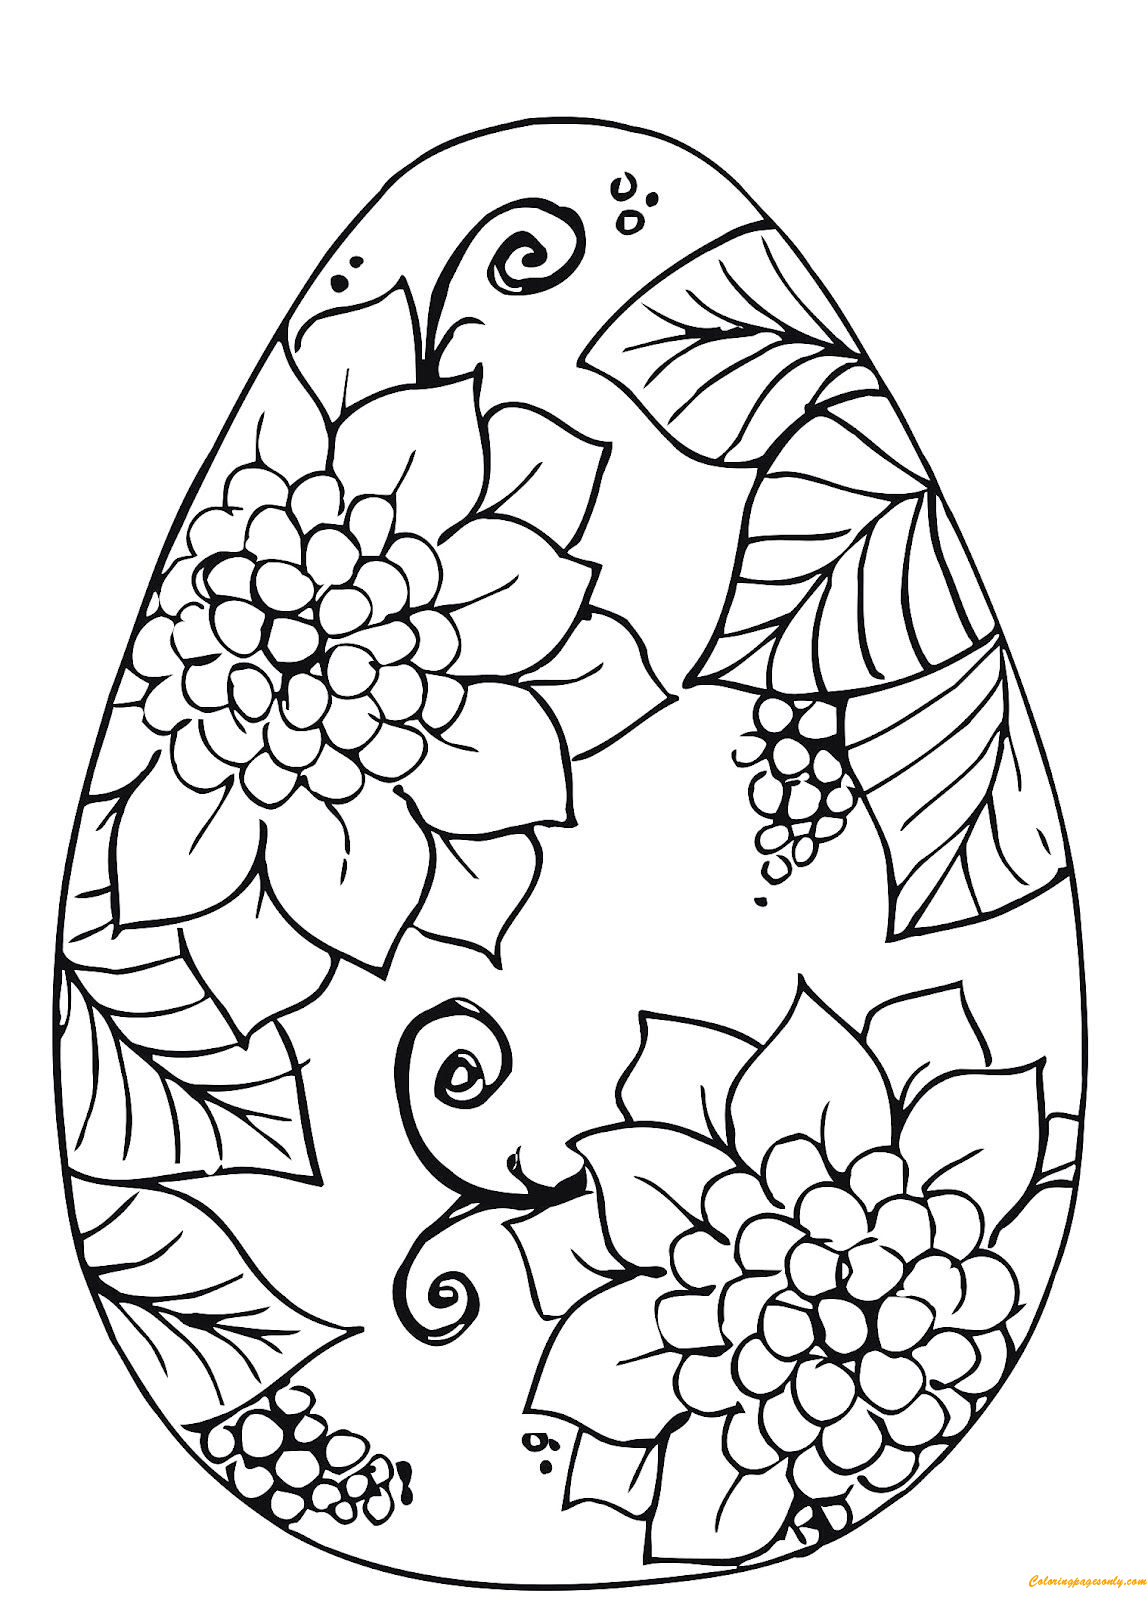 Easter Flowers Coloring Sheet (Page 1) - Line.17QQ.com